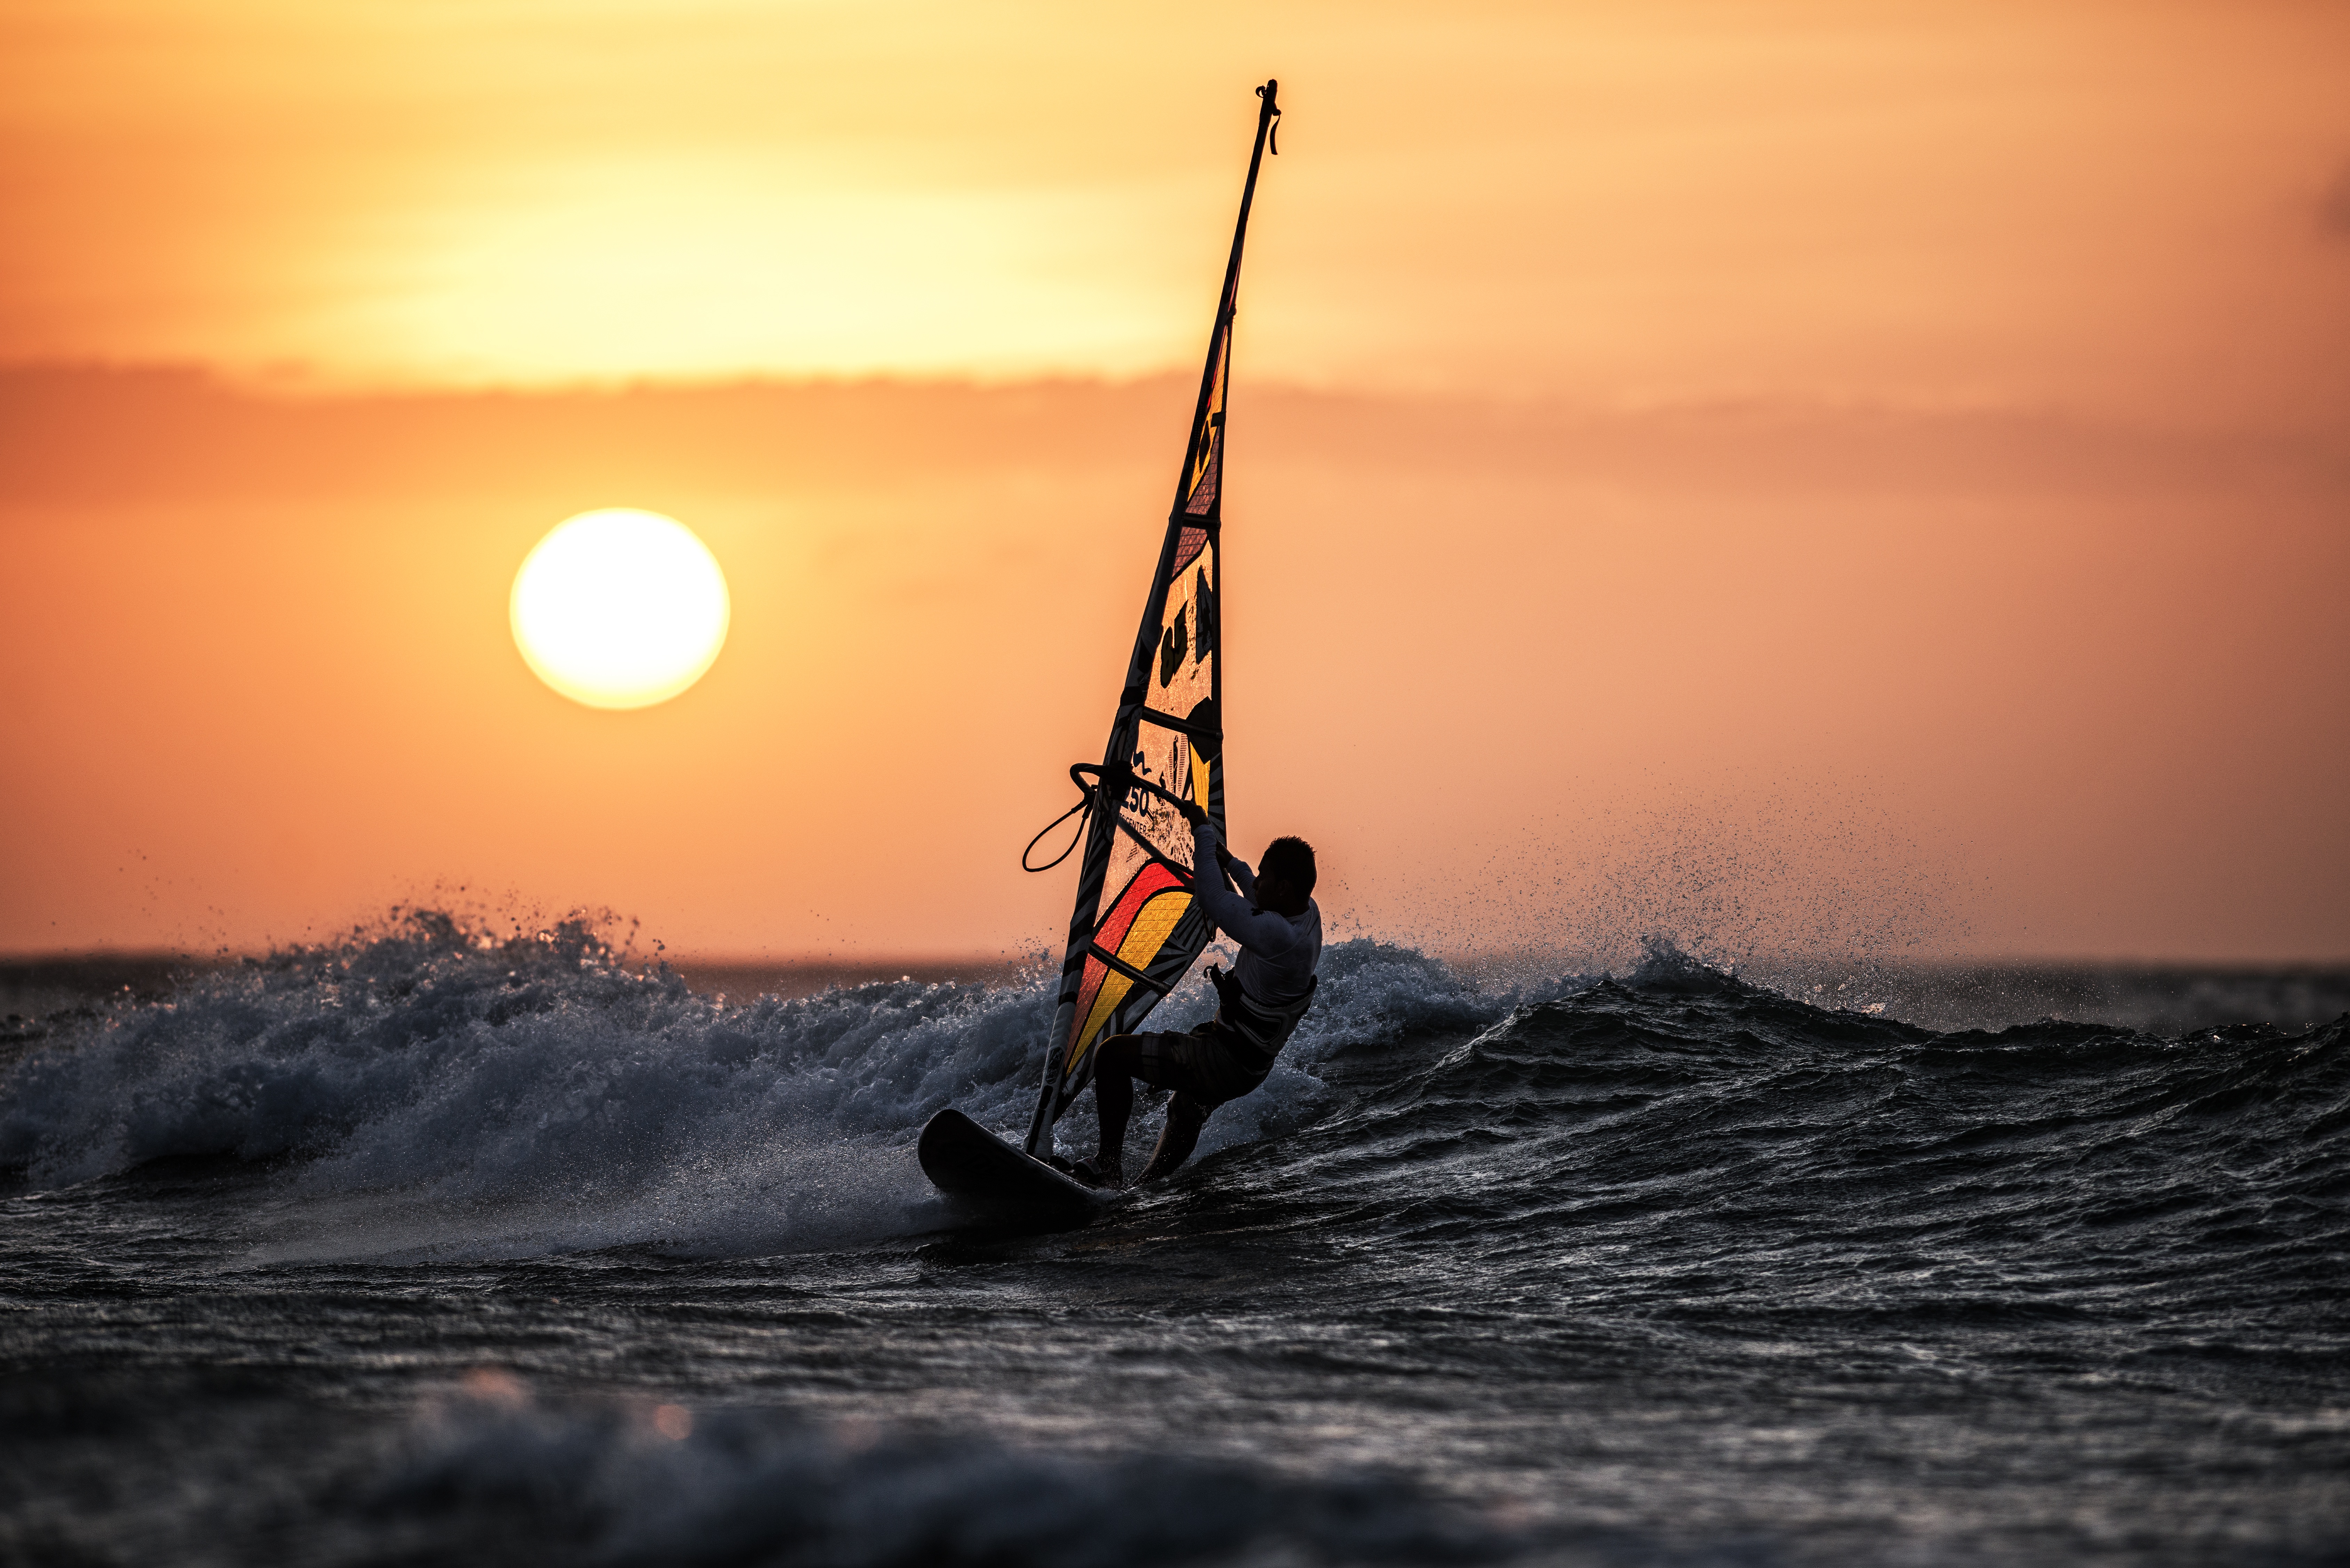 Windsurfing in the sunset